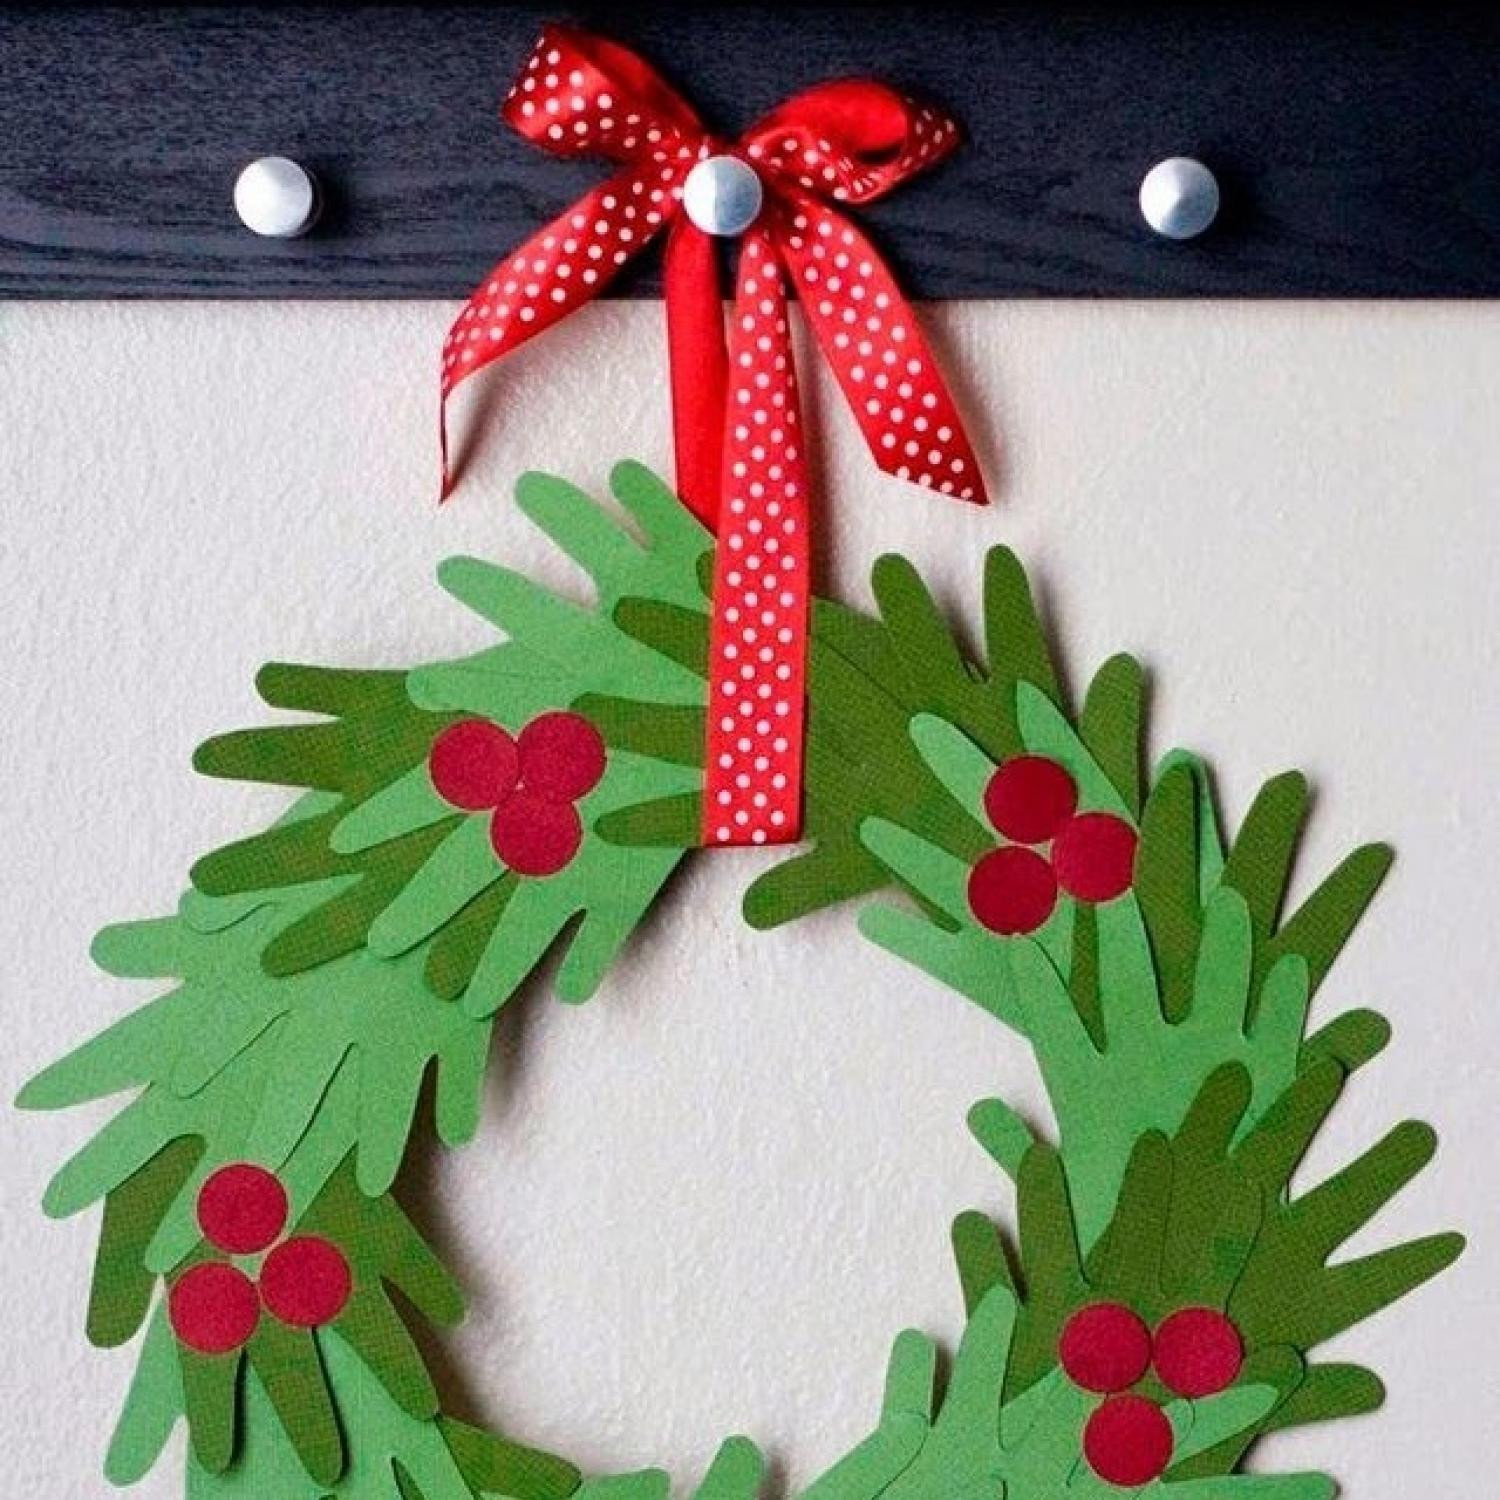 Craft Ideas For Christmas
 10 Handprint Christmas Crafts for Kids